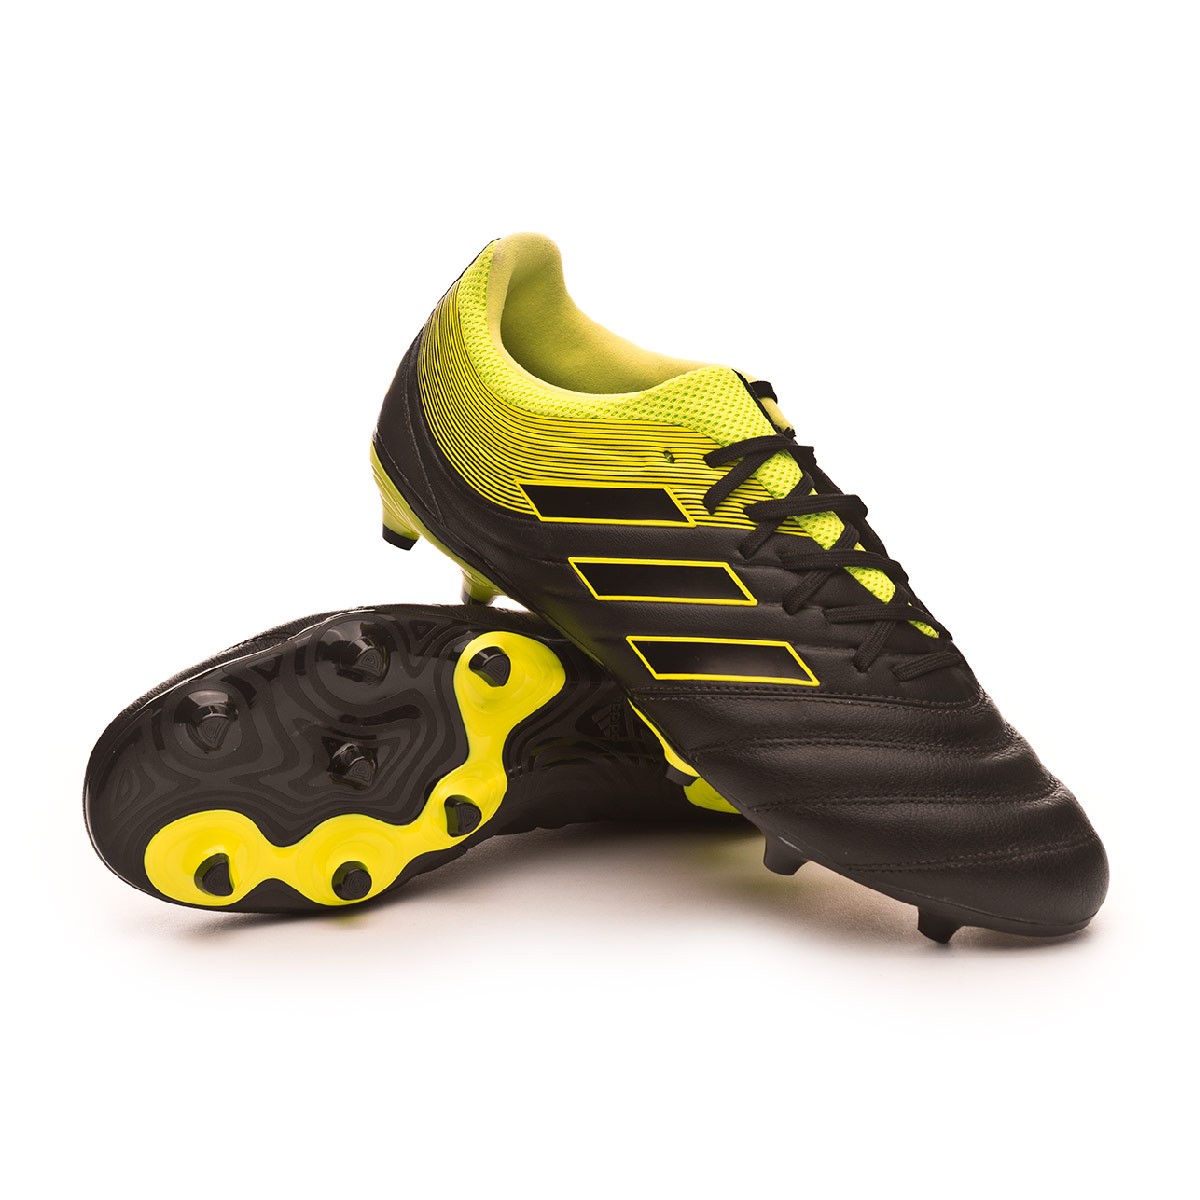 copa 19.3 firm ground boots